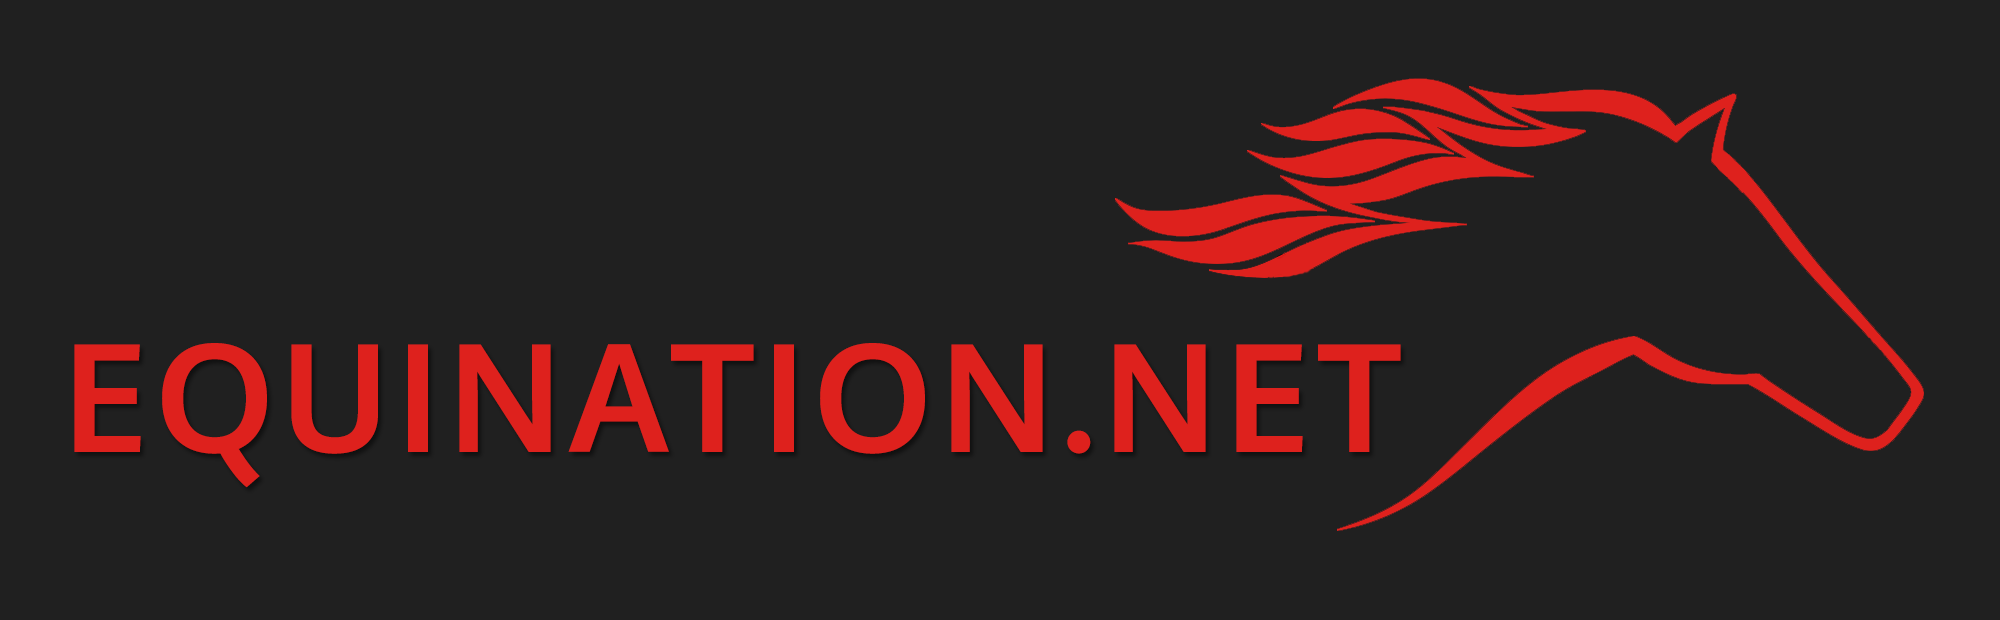 Equination.net